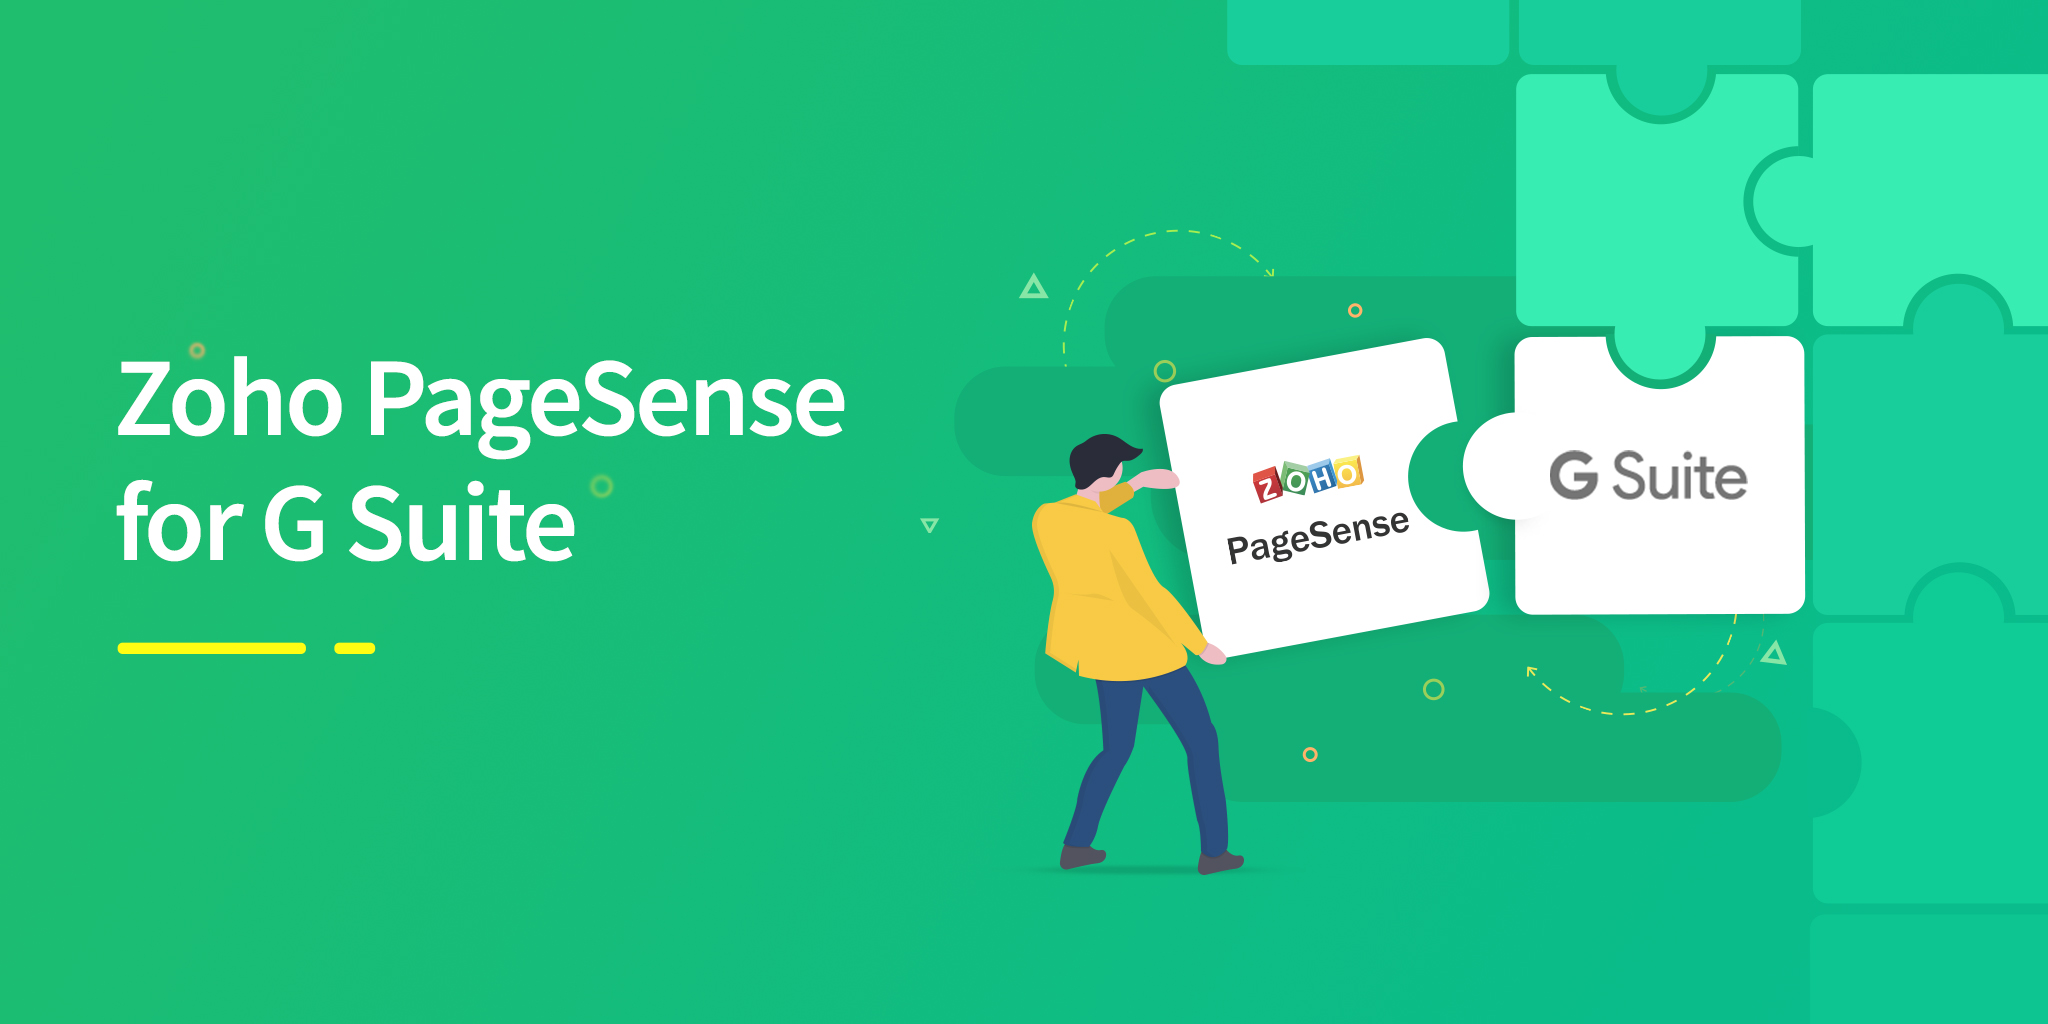 Announcing Zoho PageSense for G Suite